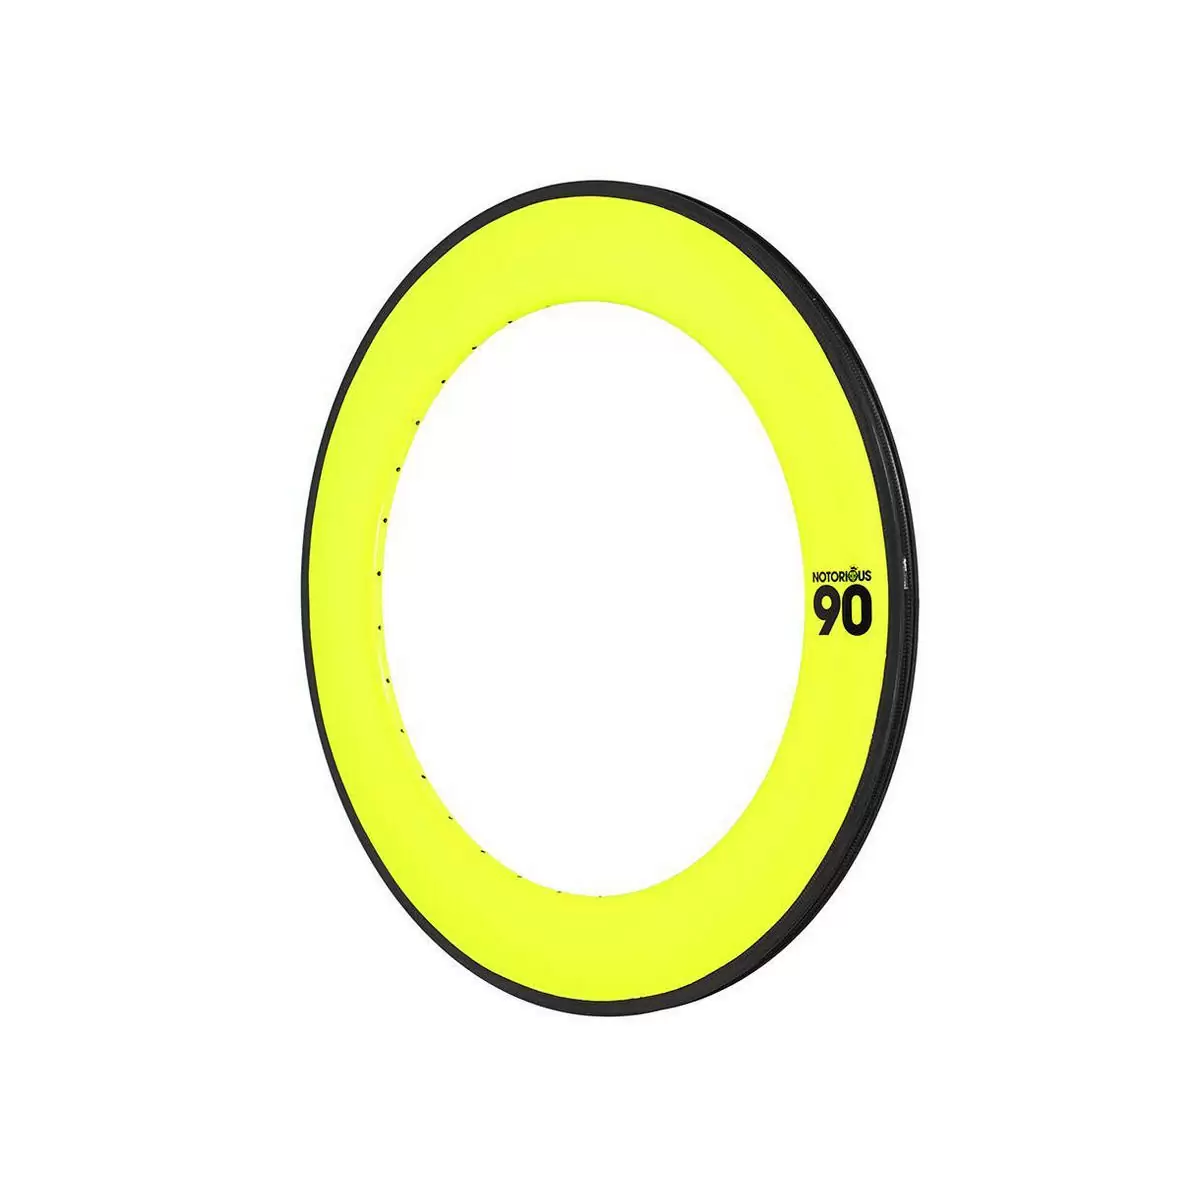 felge notorious 90 700c carbon 32h msw fluo gelb - image